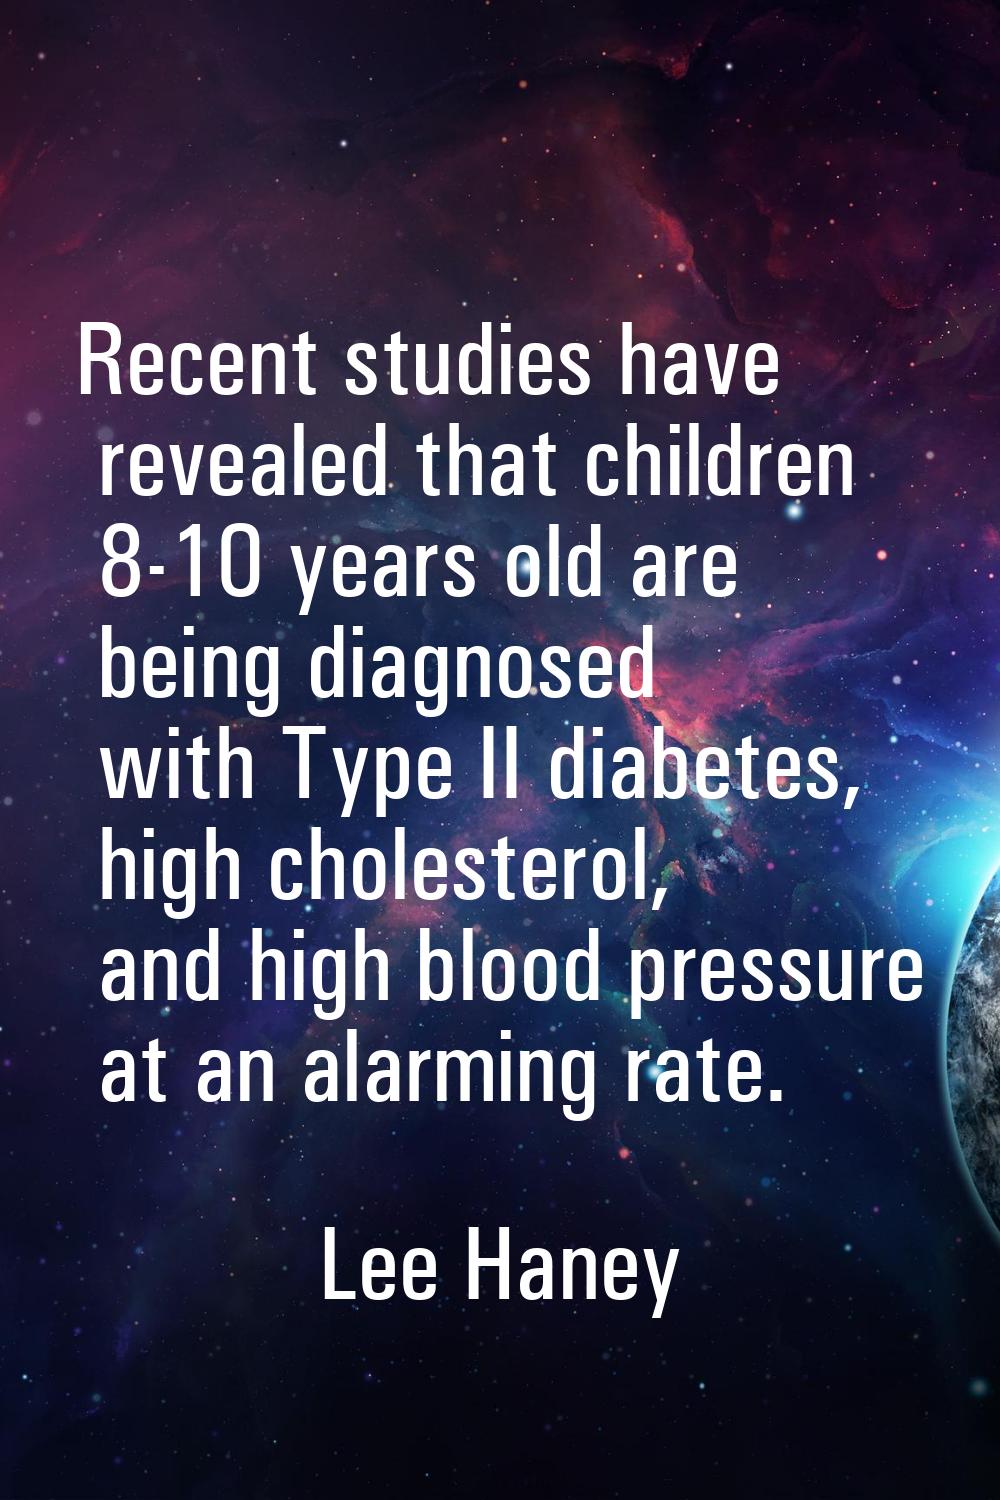 Recent studies have revealed that children 8-10 years old are being diagnosed with Type II diabetes